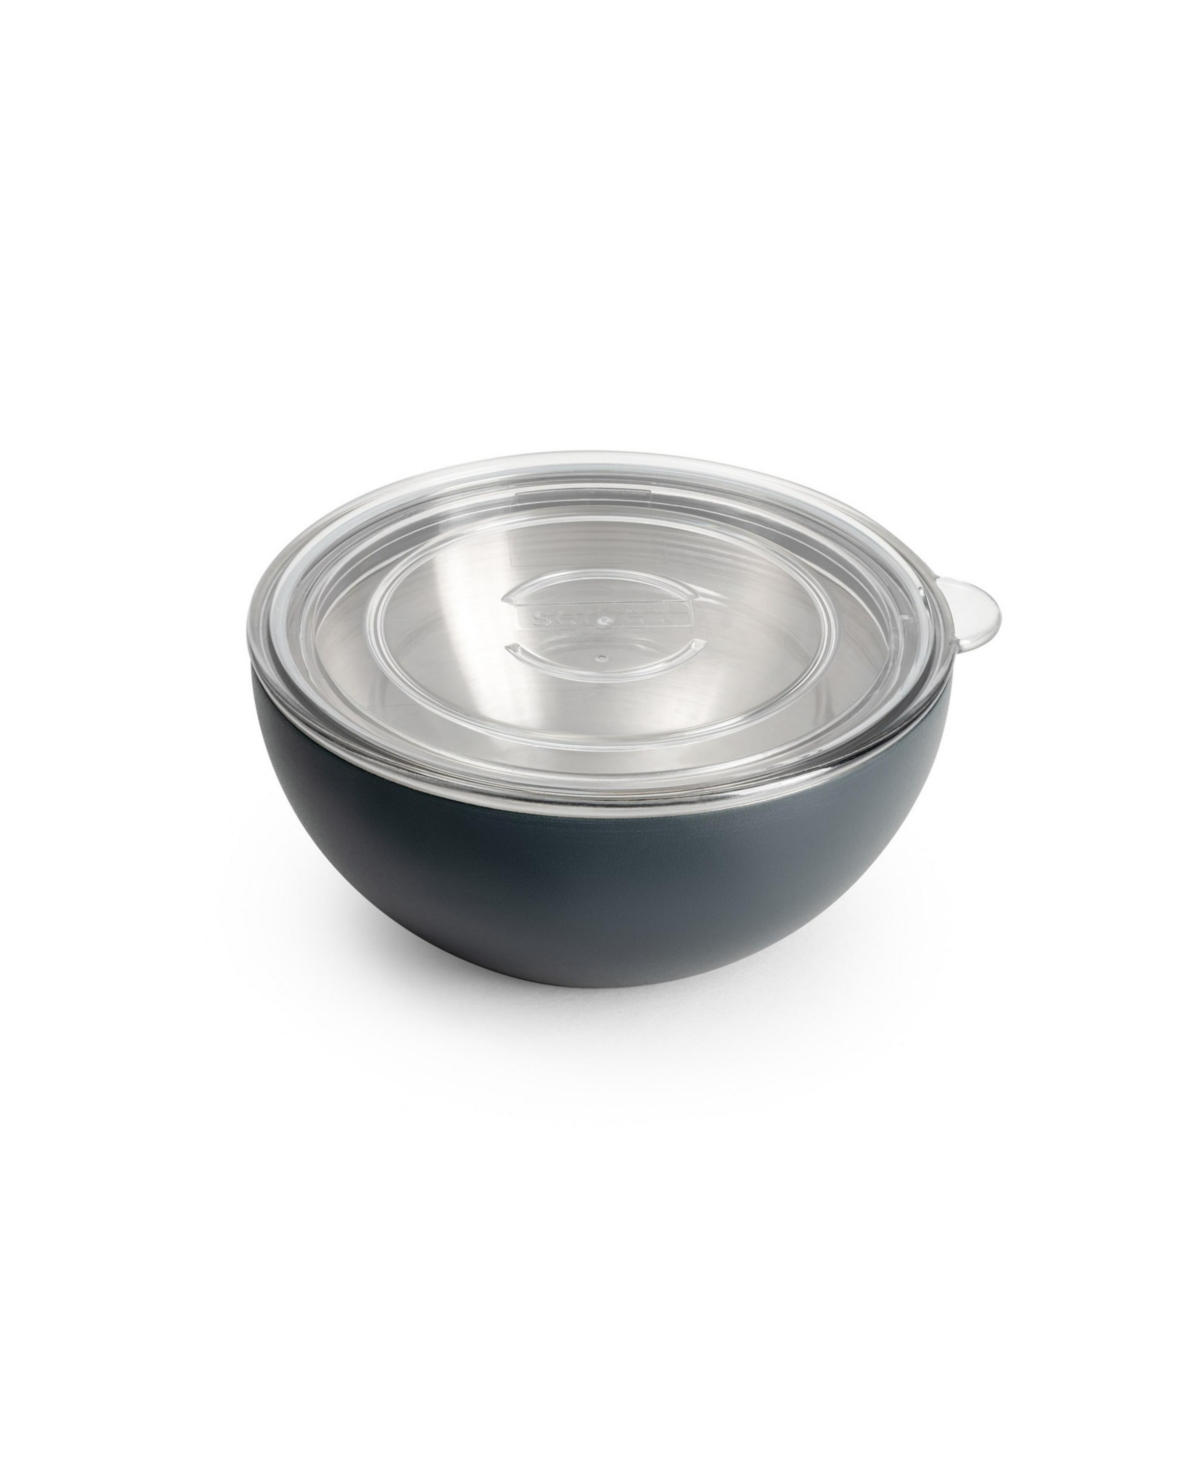 Served Vacuum-insulated Double-walled Copper-lined Stainless Steel Small Serving Bowl, 0.62 Quarts In Caviar